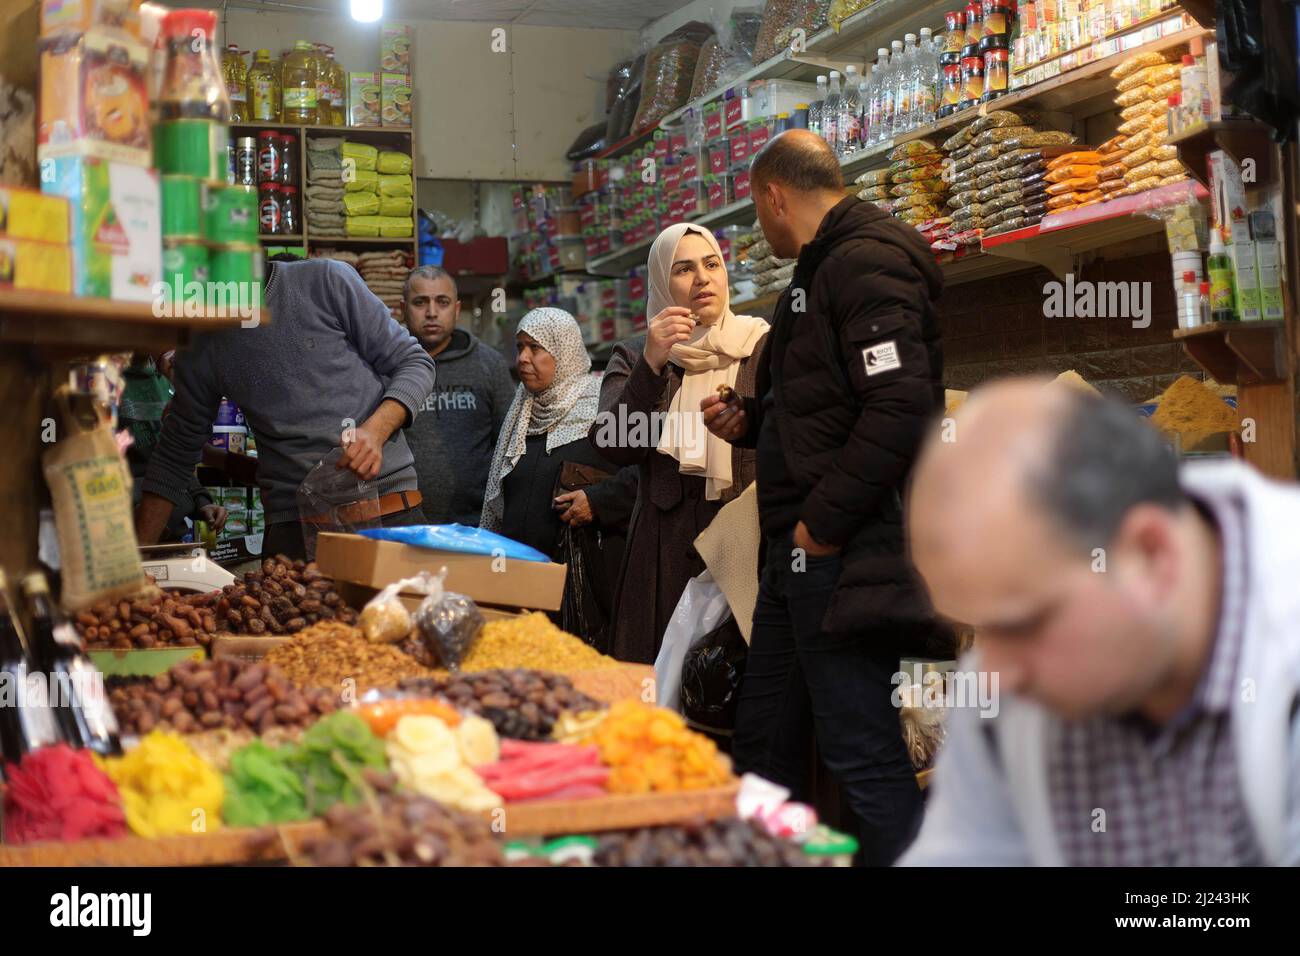 Palestinians shop from the old popular 'Al-Zawya' market ahead of Ramadan in Gaza City. Palestinians prepare themselves ahead of the holy month of Ramadan by shopping in the oldest popular market called Al-Zawya middle of Gaza City, despite the high price of the goods in general caused by the Russian invasion of Ukraine. Muslims fast in Ramadan month, which is considered one of the pillars of Islam, in which Muslims abstain from eating and drinking until sunset. Stock Photo